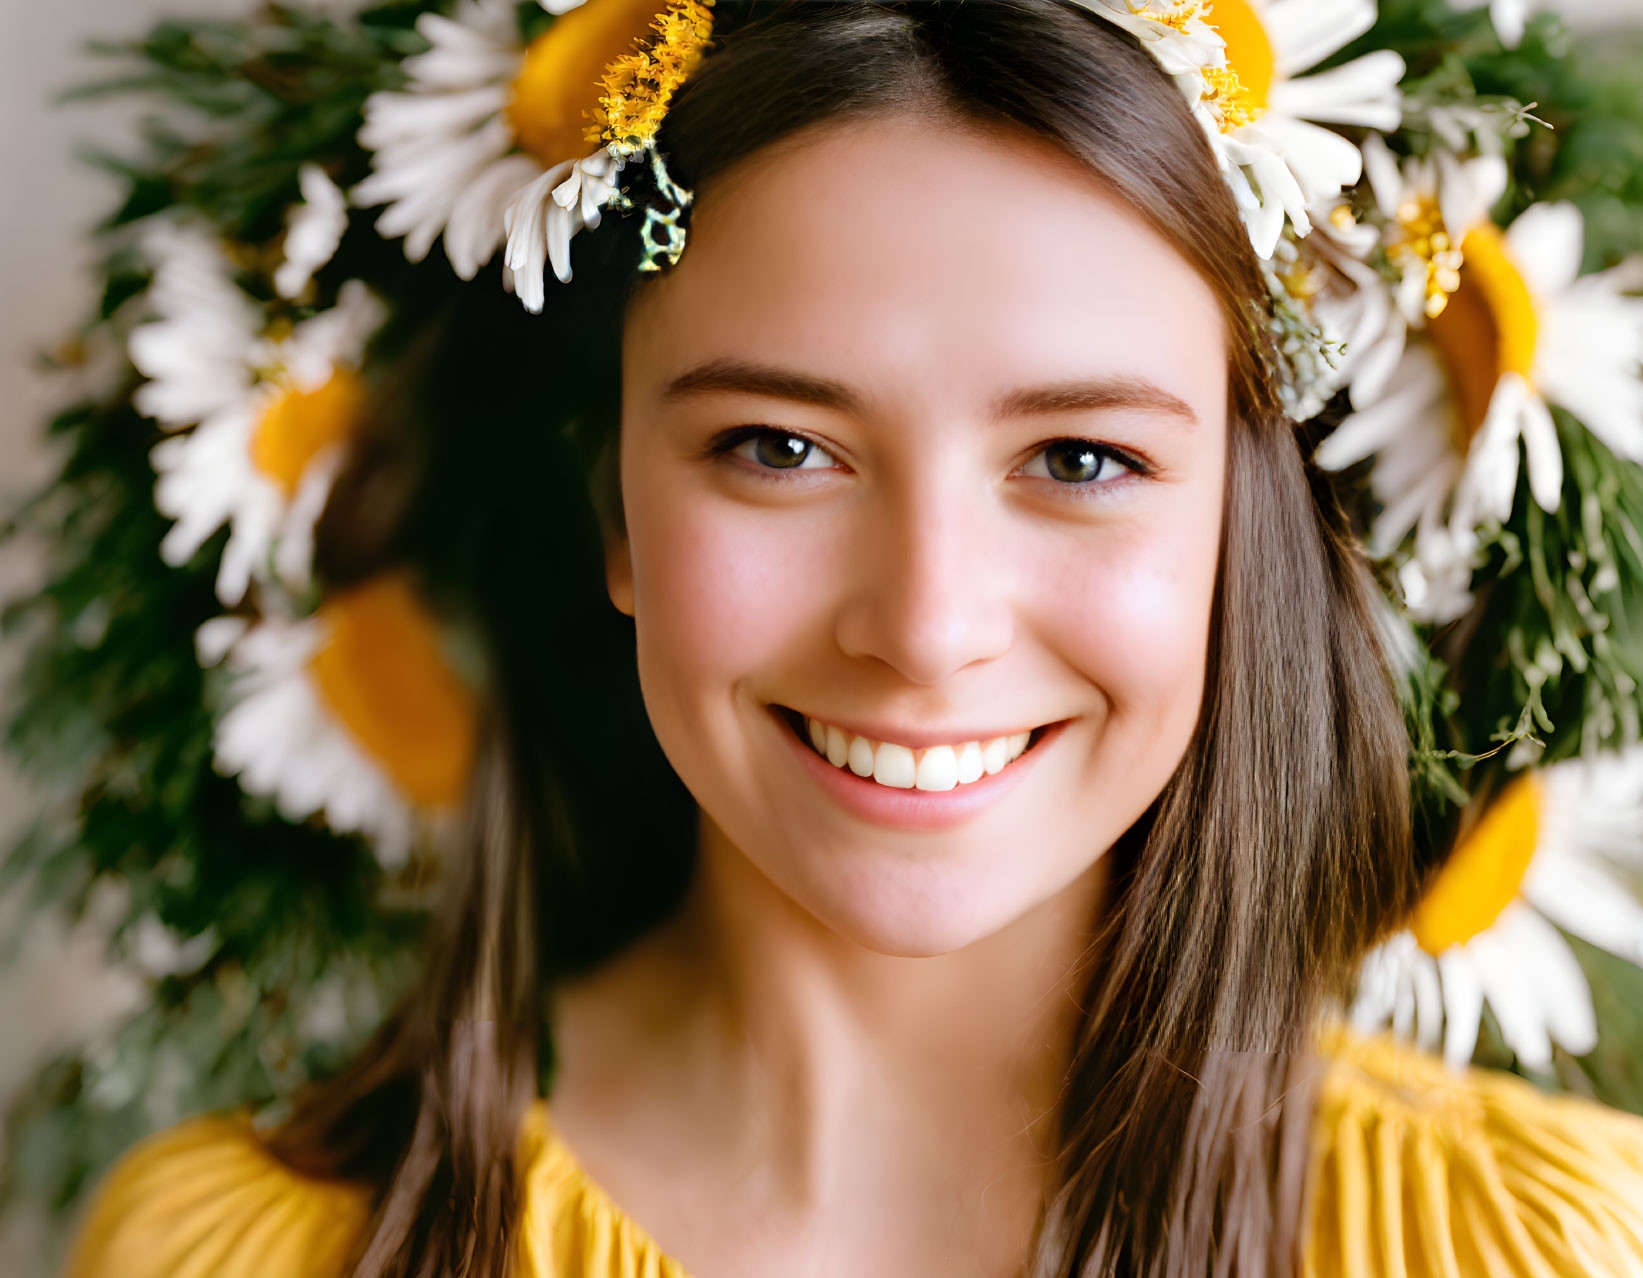 Smiling young woman with daisy flower crown and yellow top